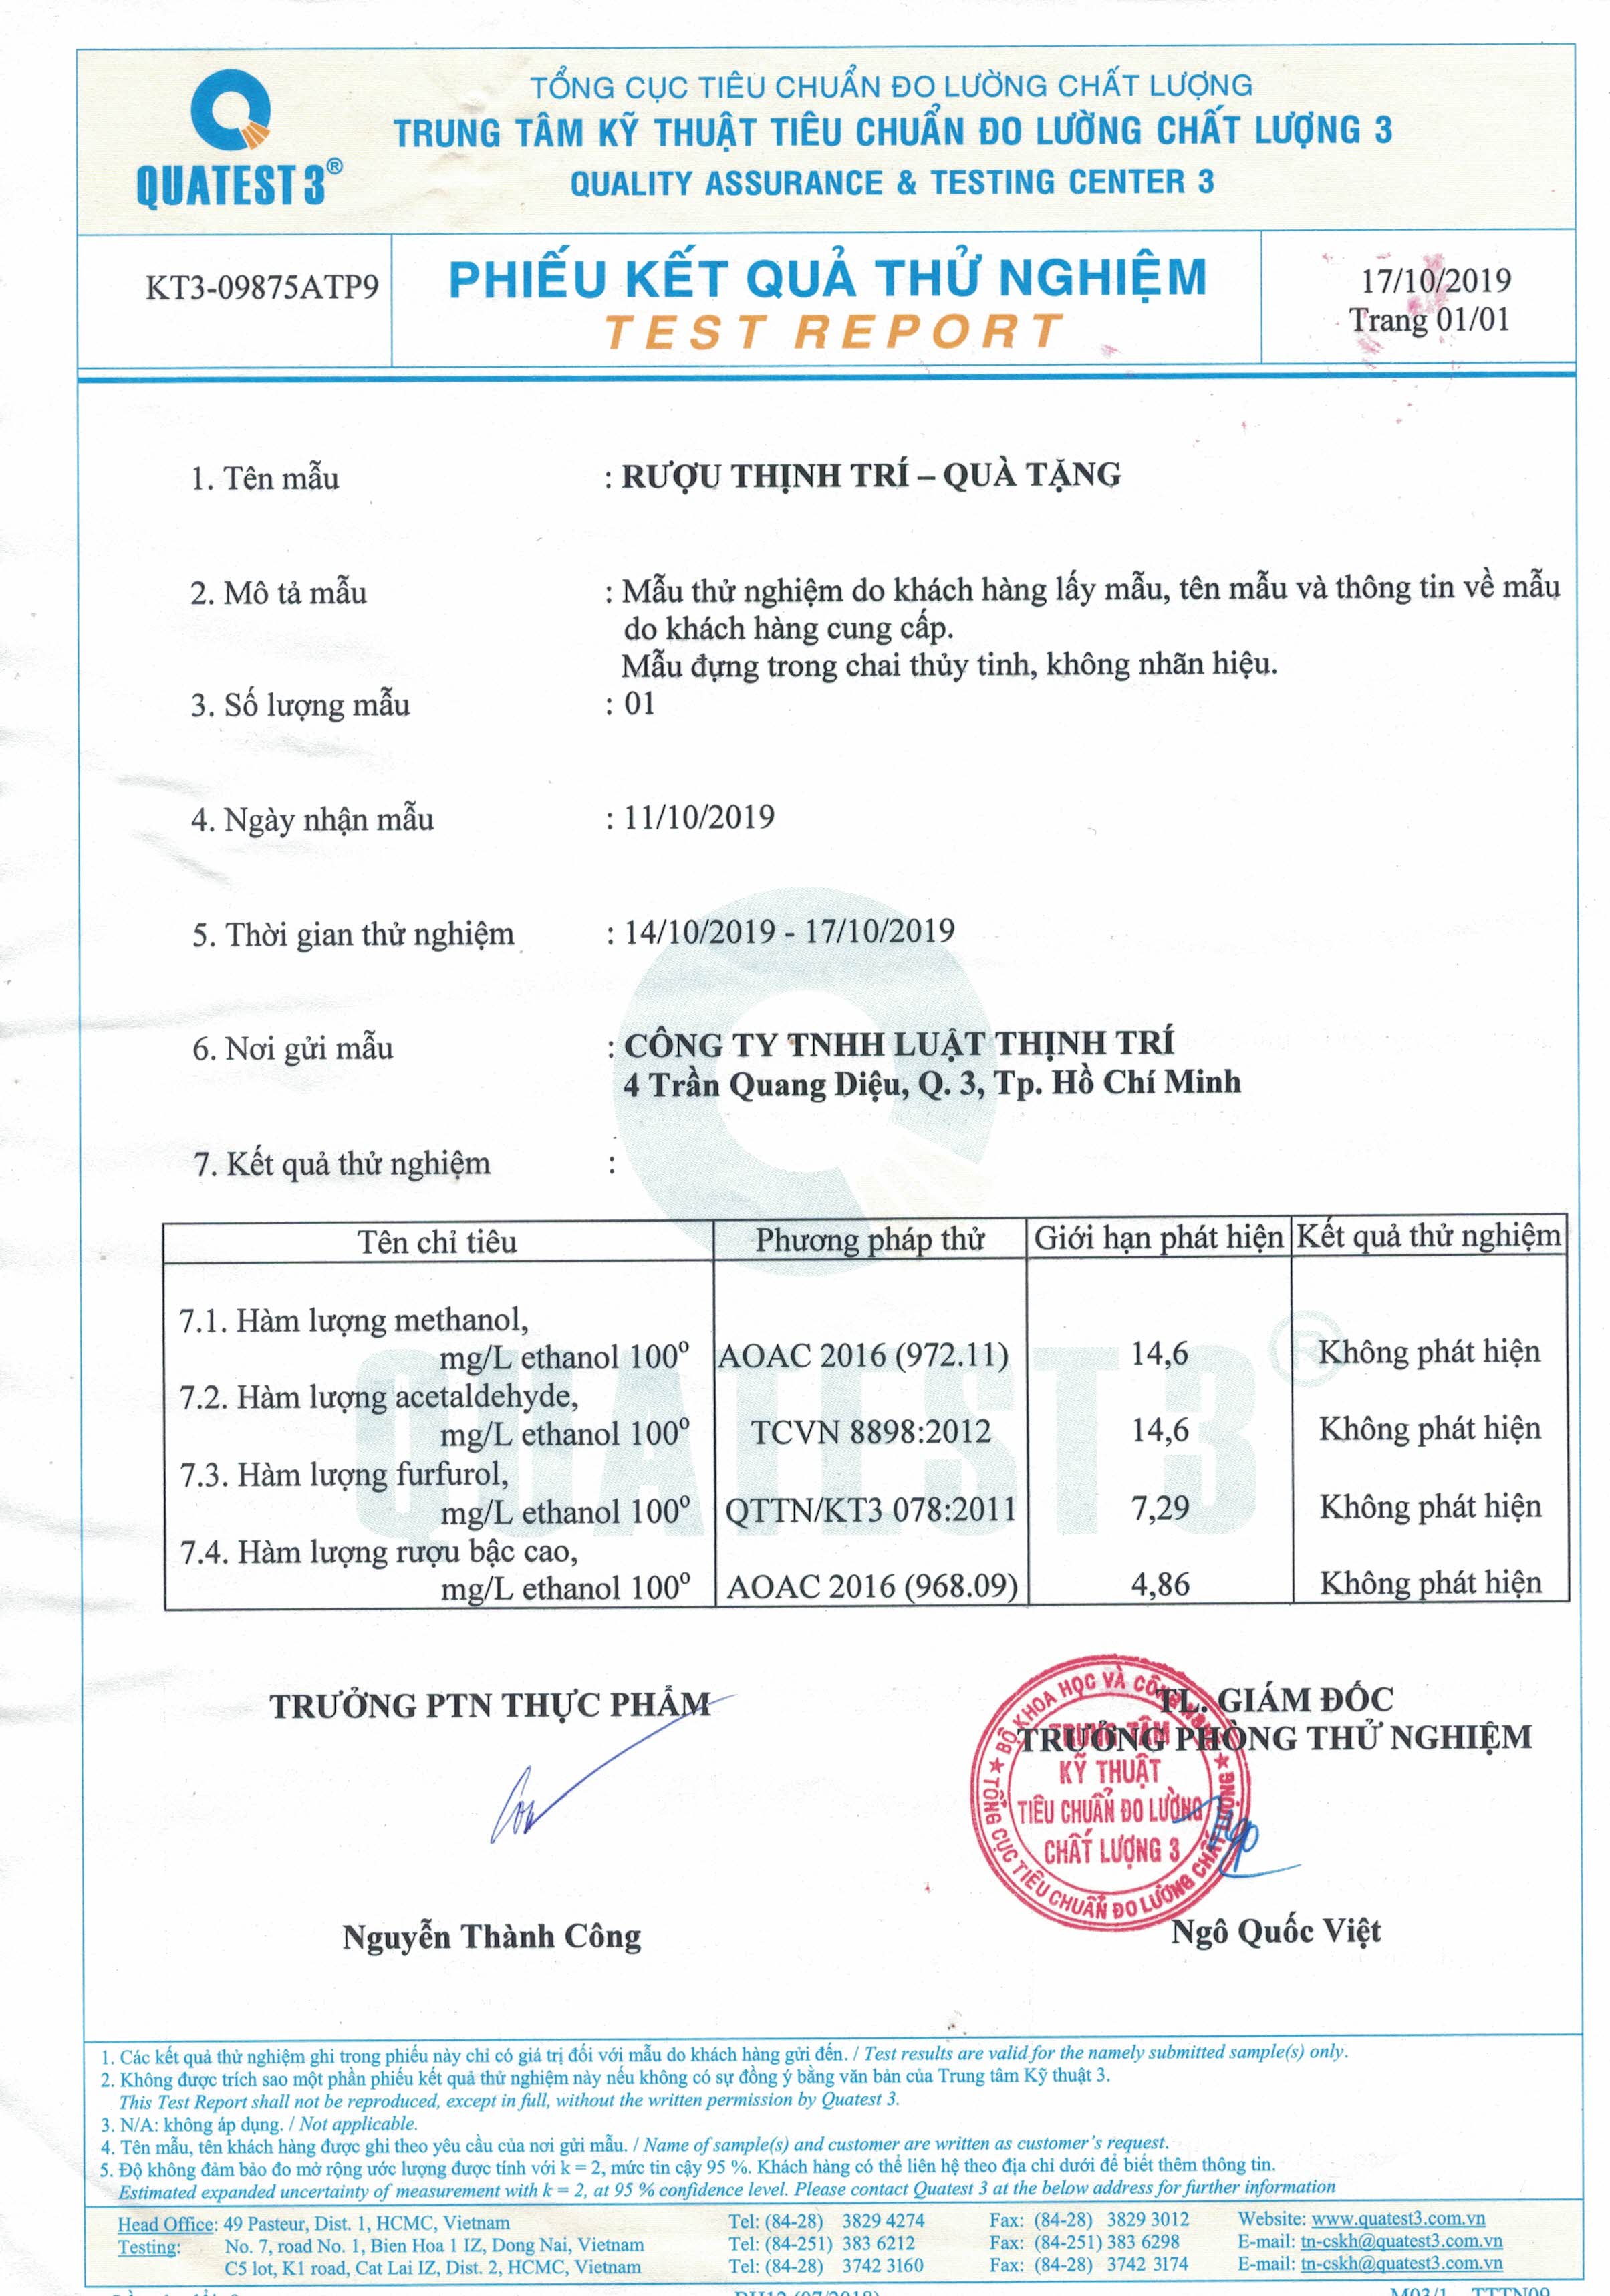 CERTIFICATE OF THINH TRI WINE TESTING